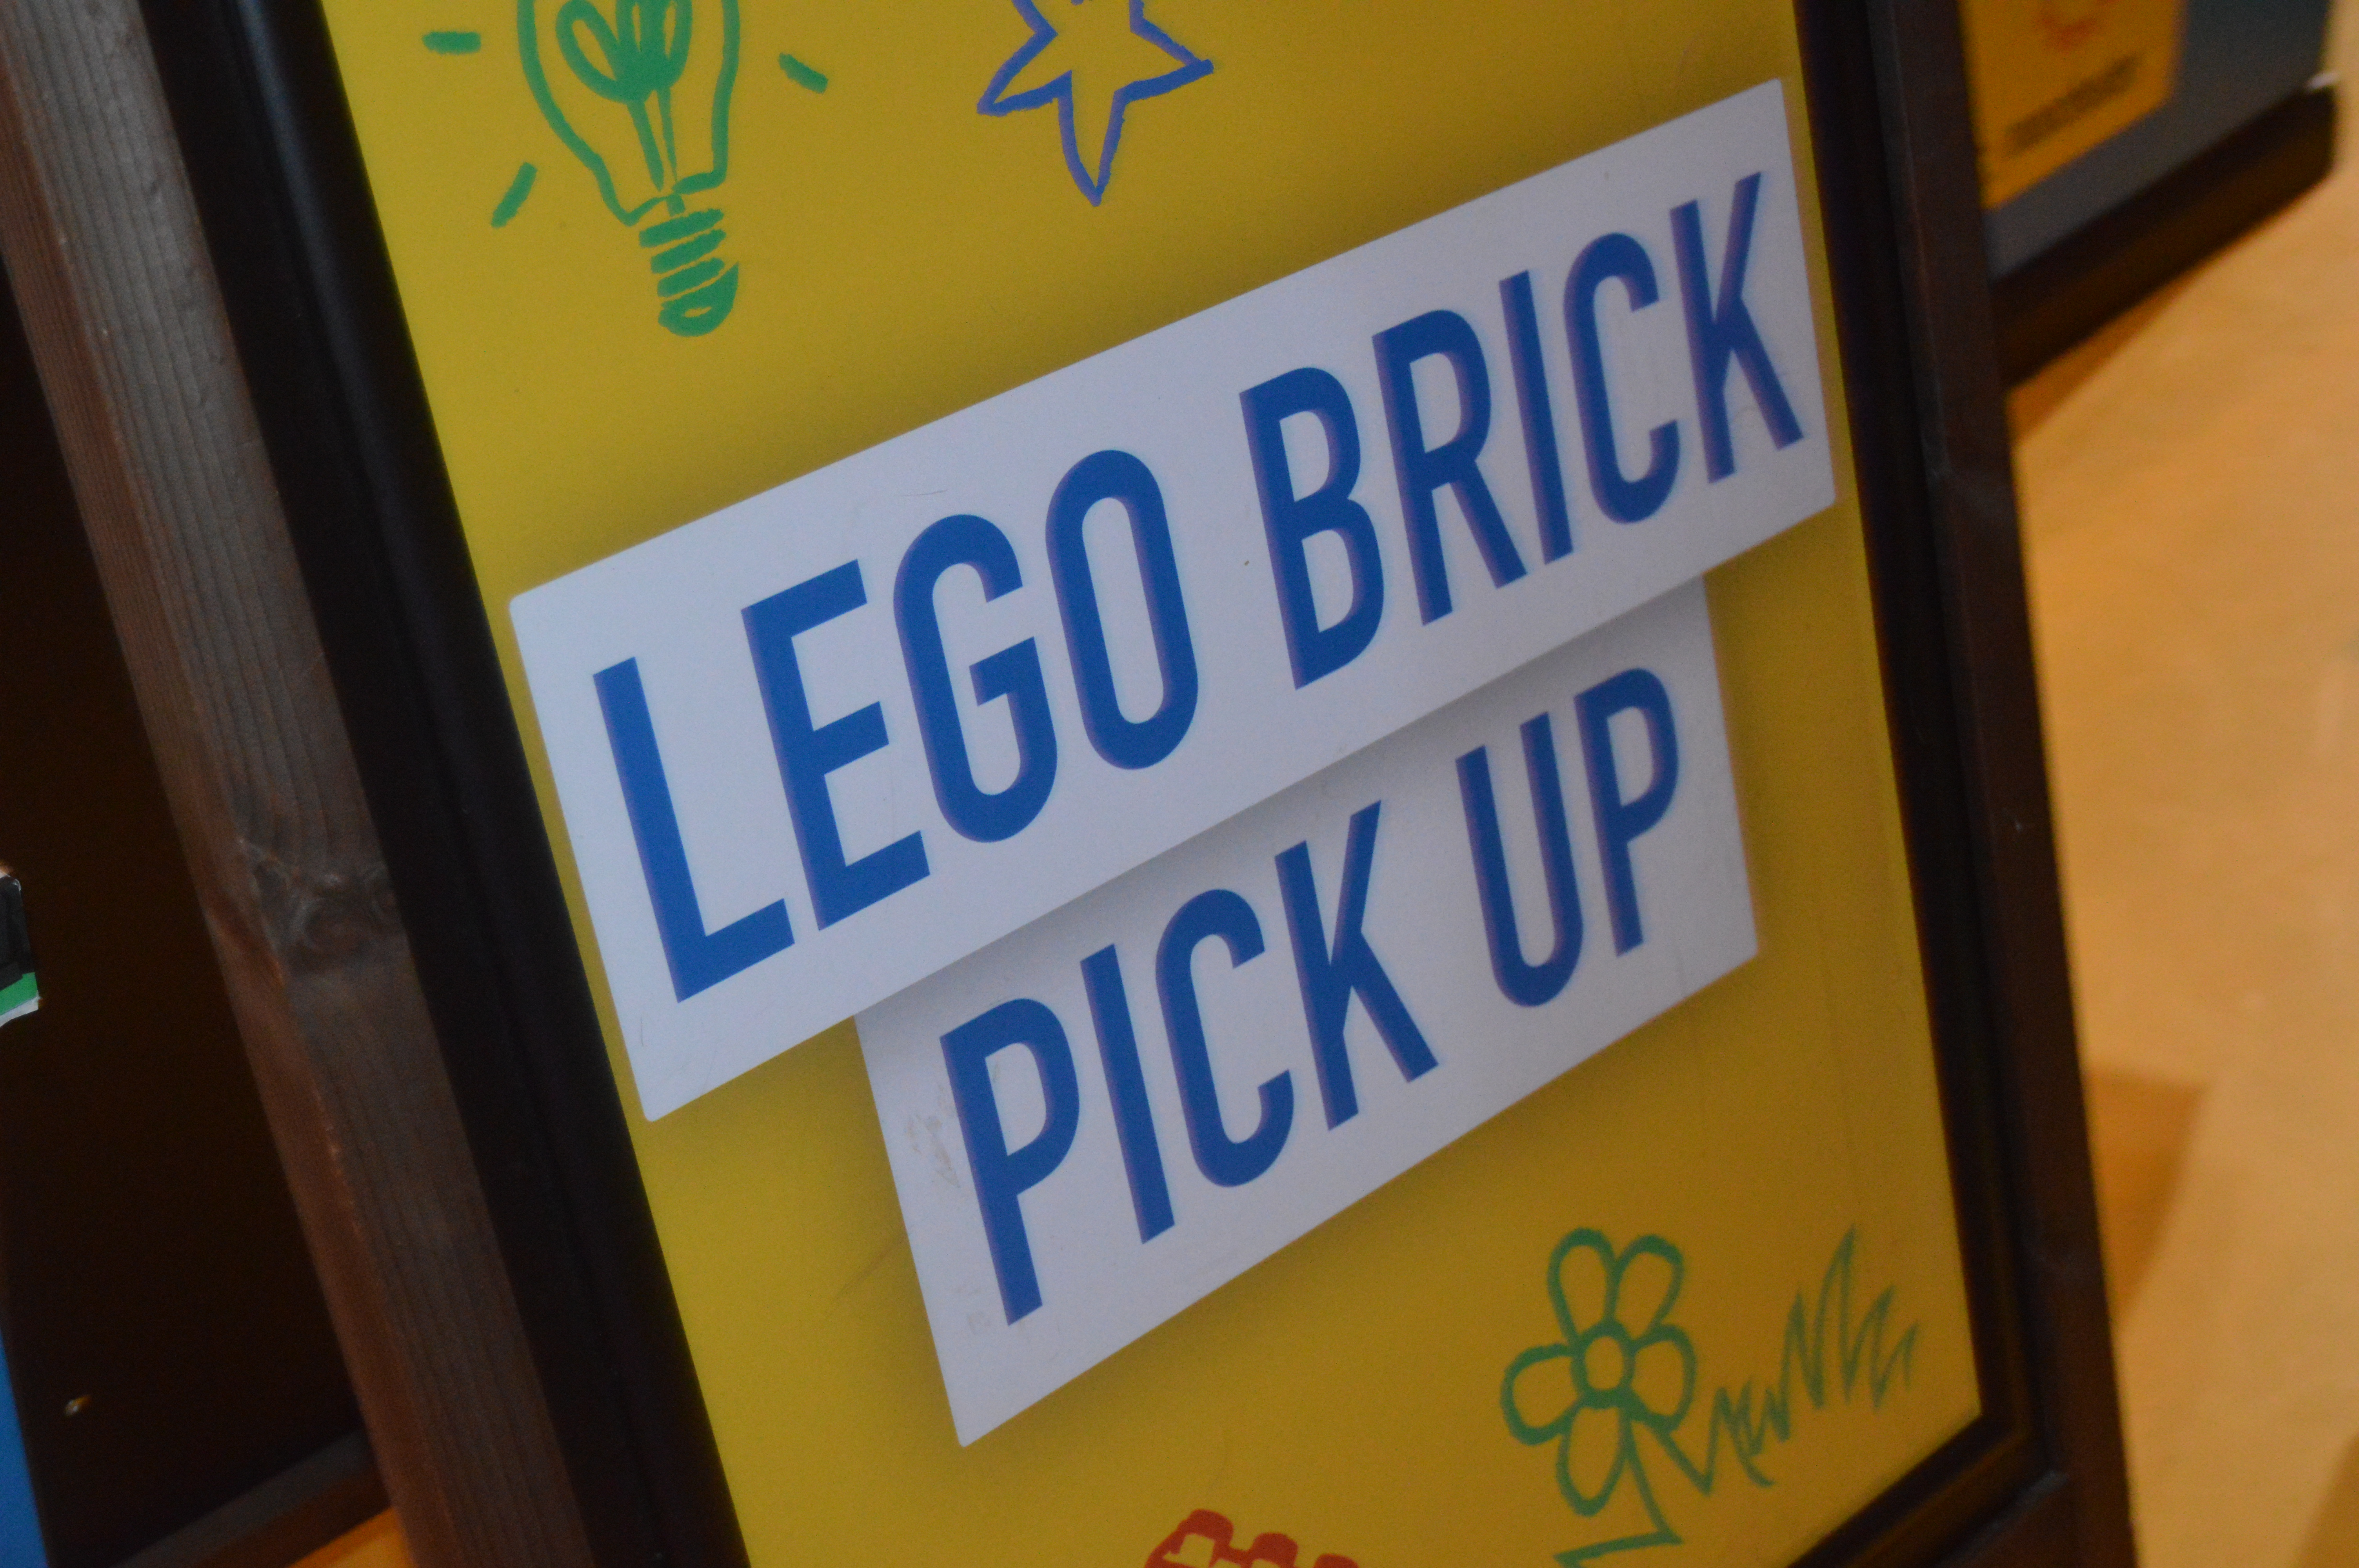 Lego Pick Up at Legoland Discovery Centre